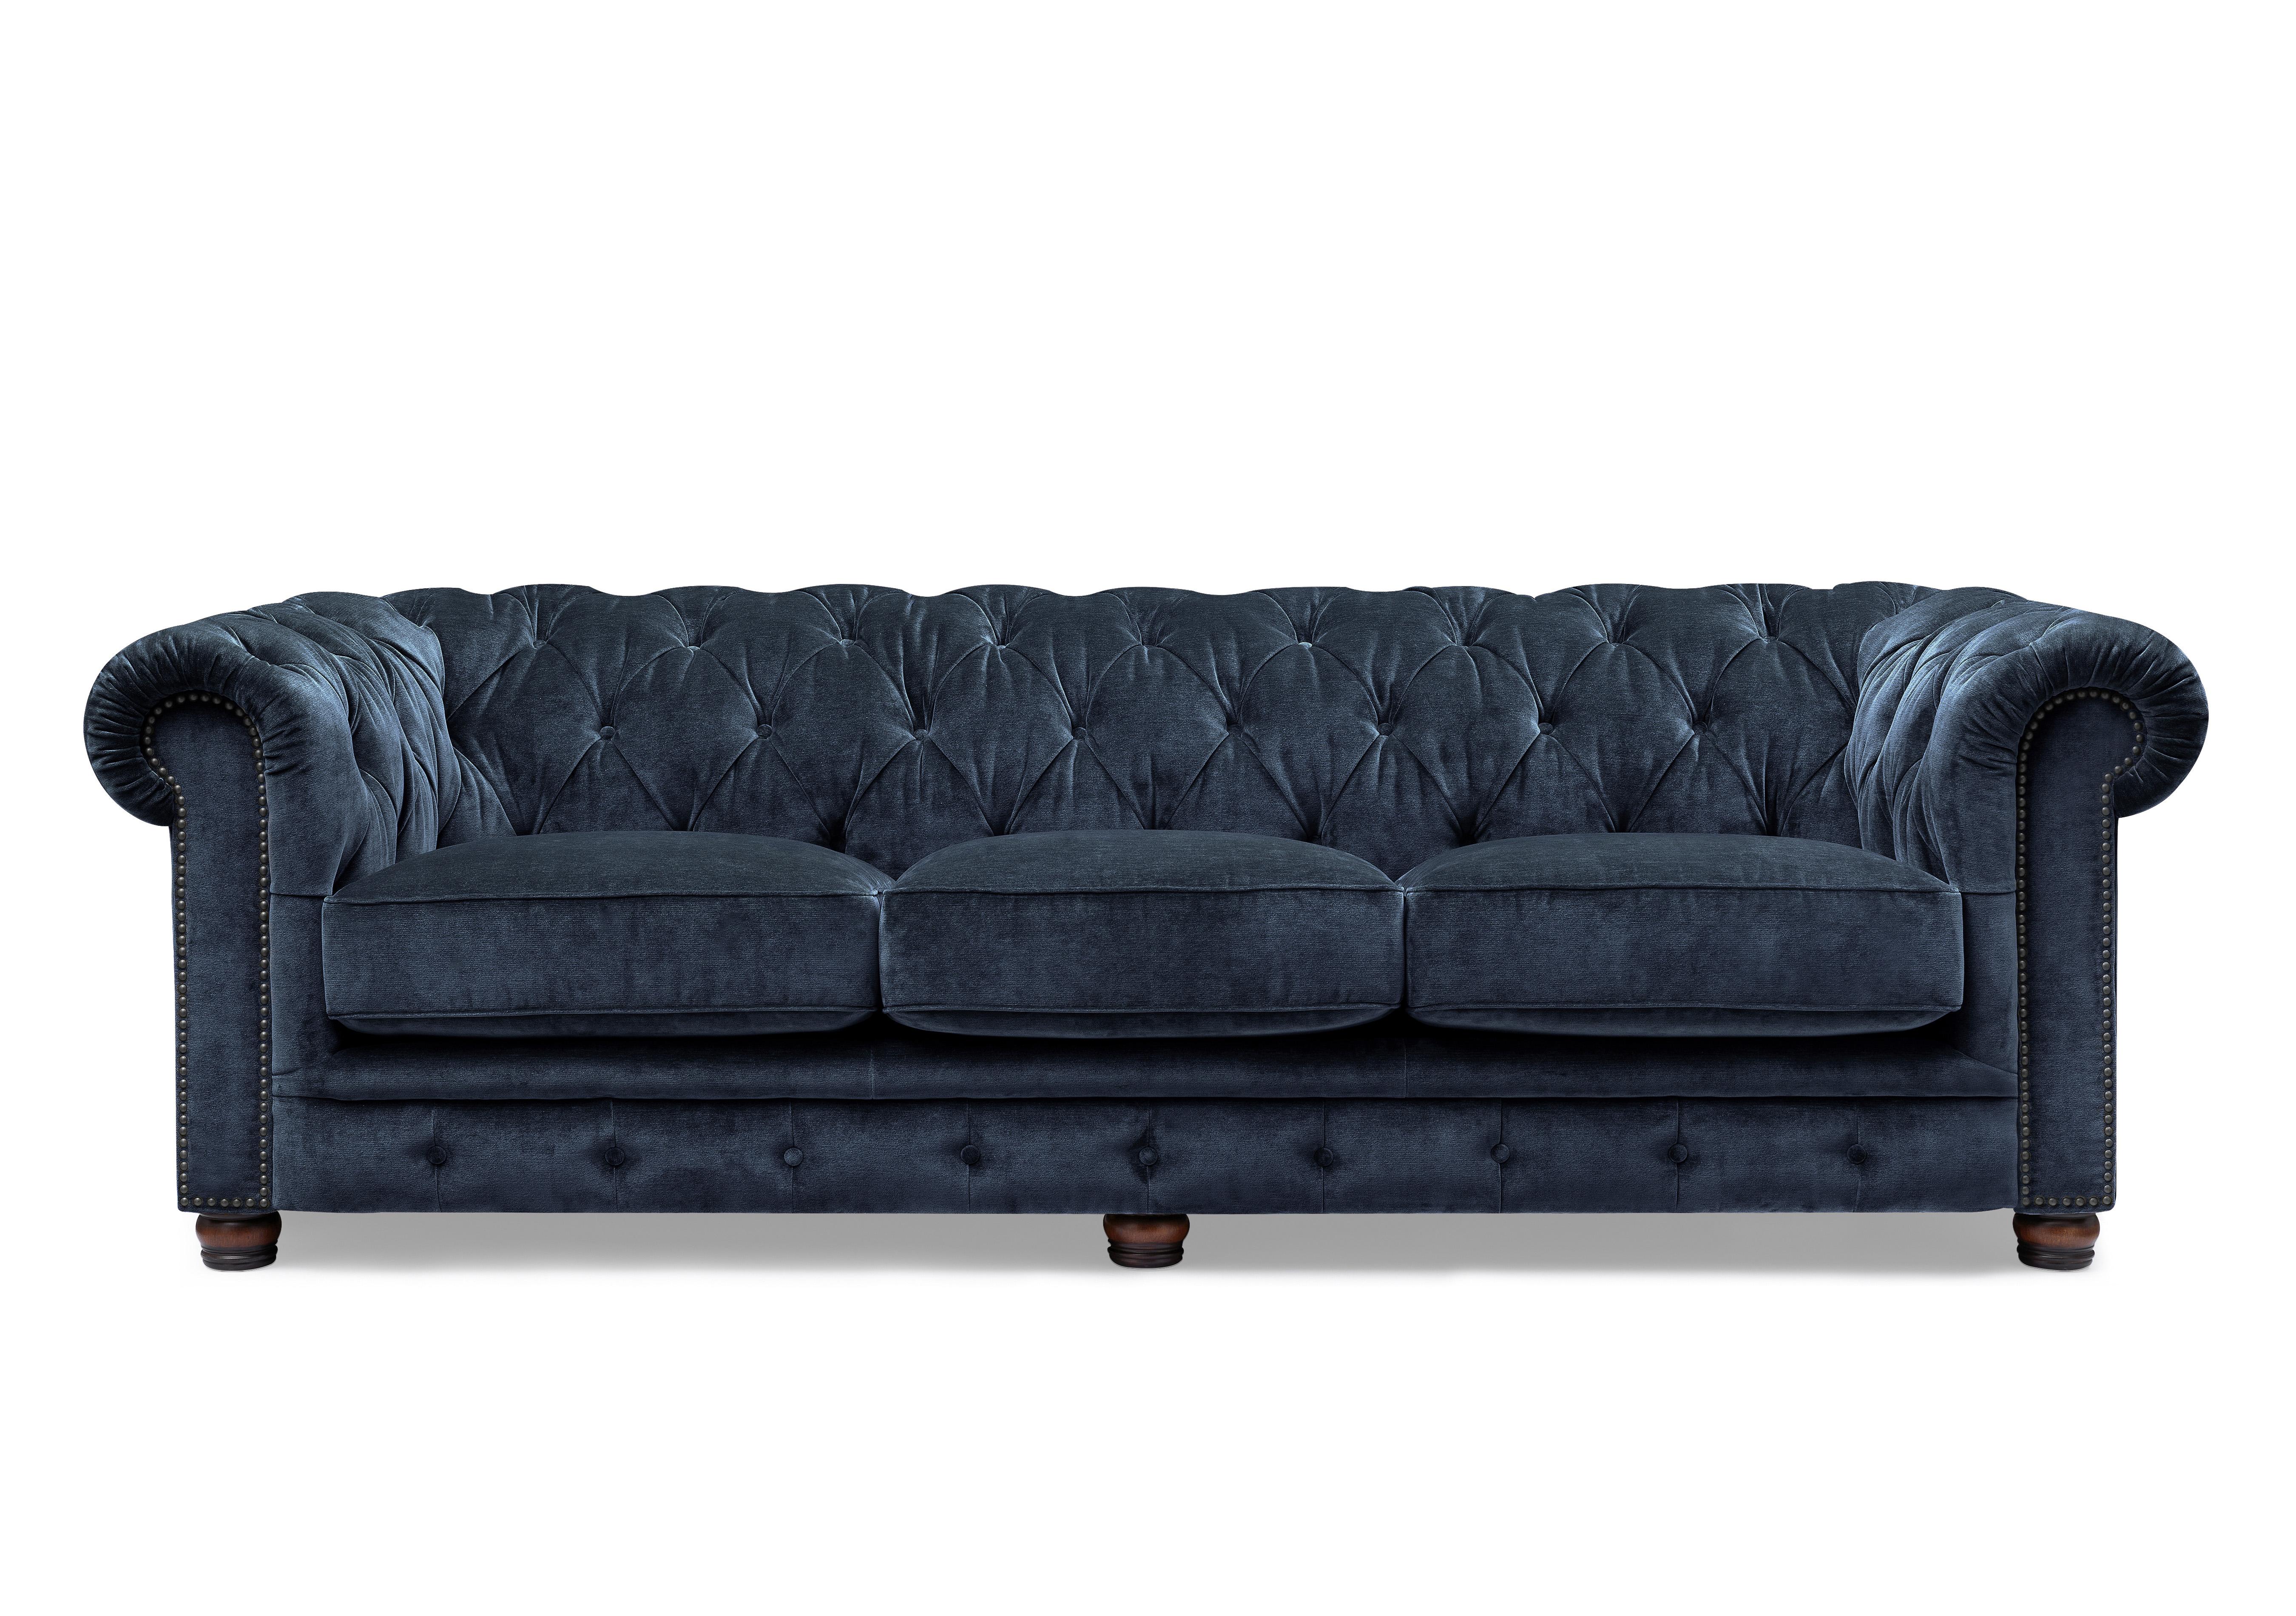 Shackleton 4 Seater Fabric Chesterfield Sofa in X3y2-W024 Midnight on Furniture Village